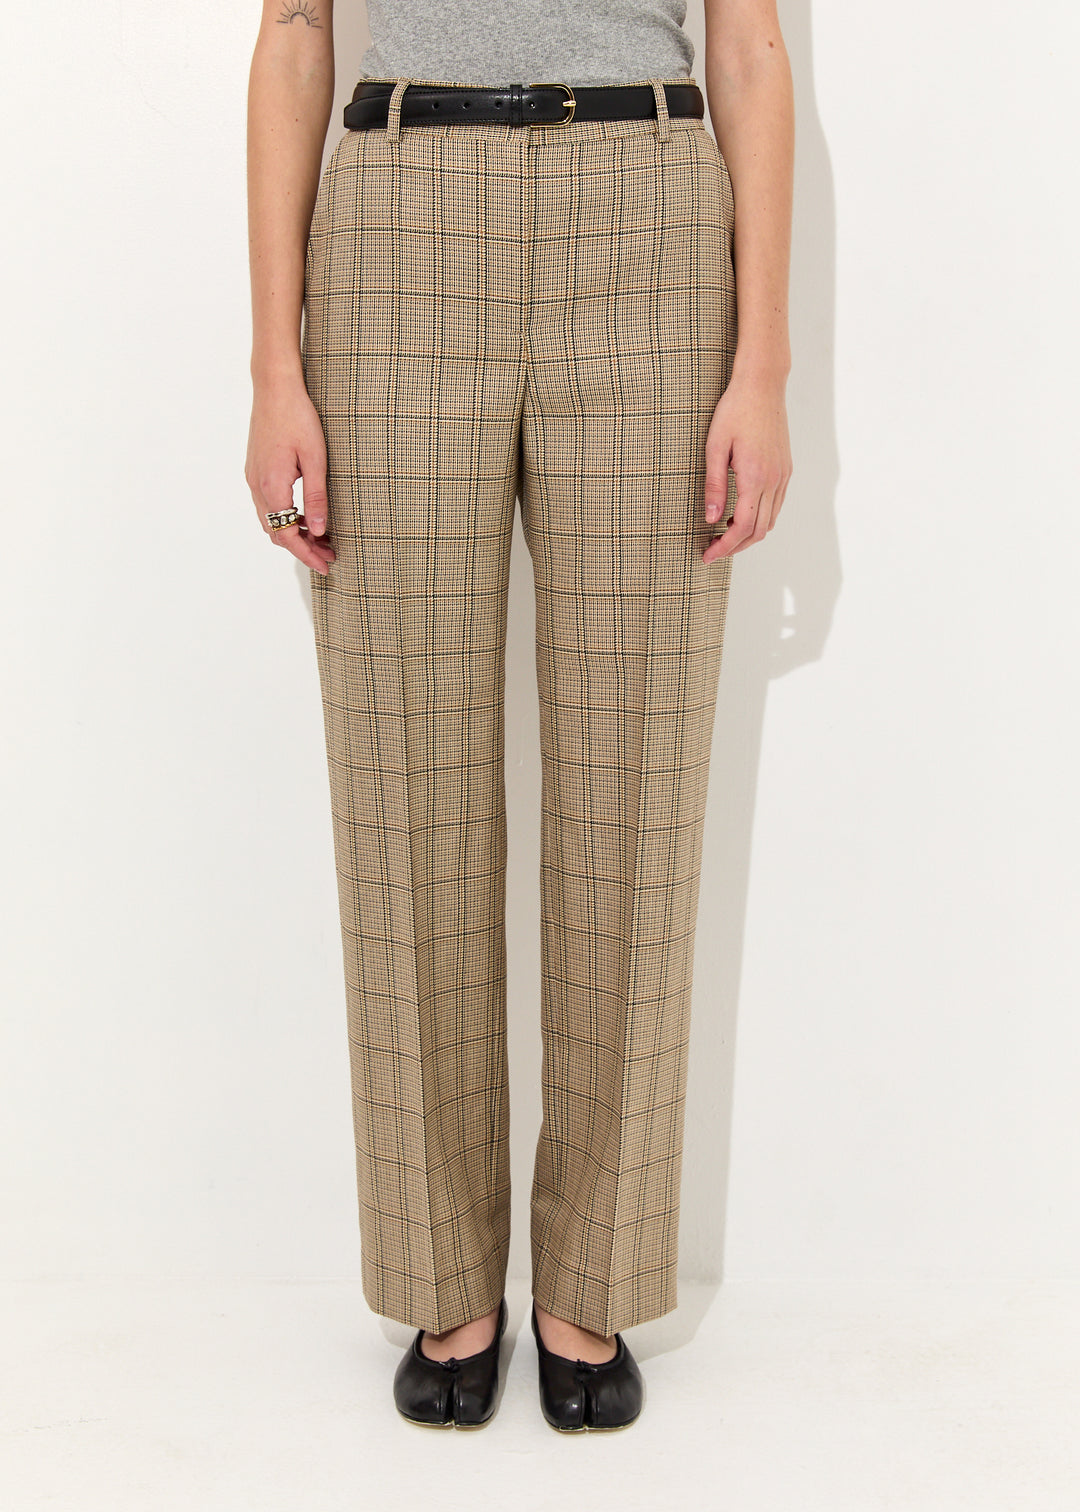 Windowpane-check suit trousers